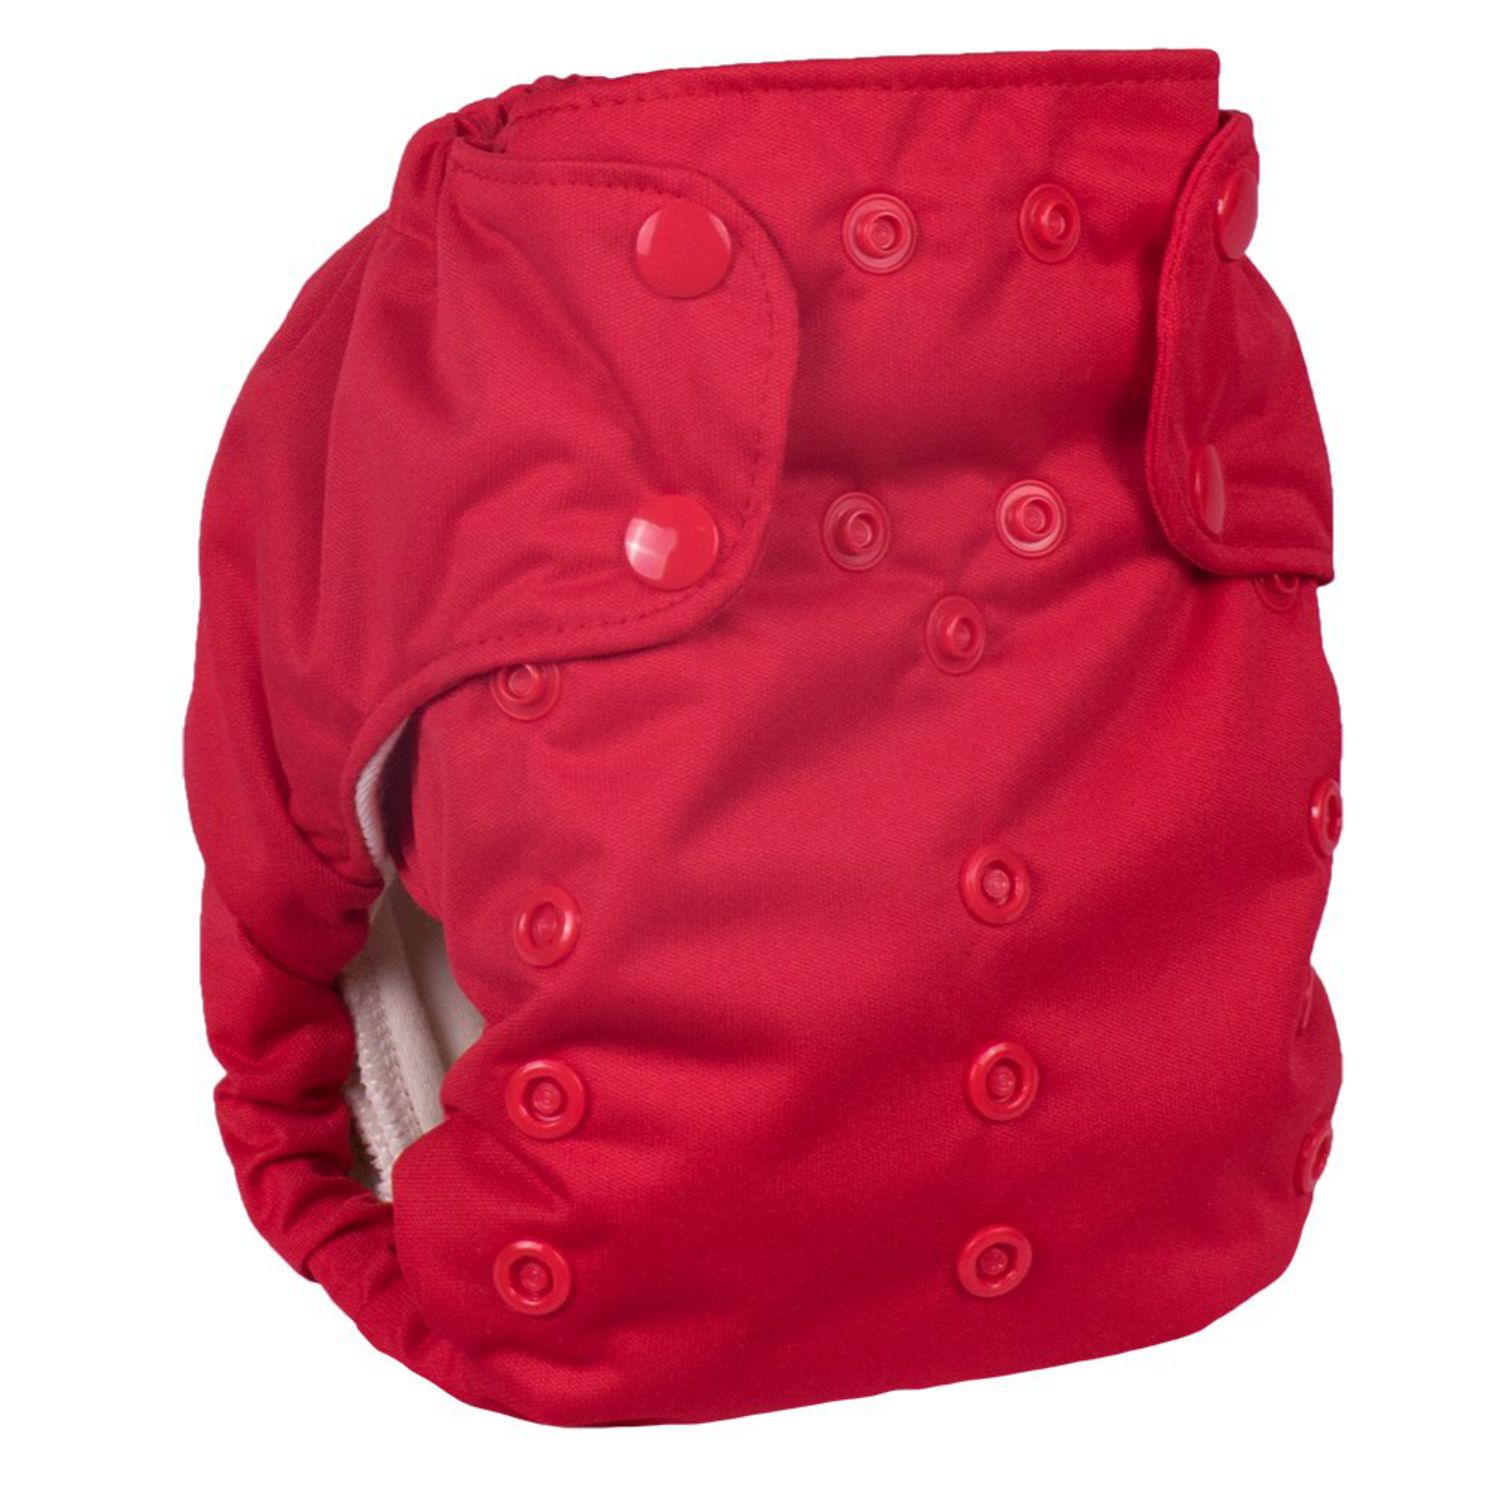 Smart Bottoms 3.1 One Size All-in-One nappy Pattern: Basic Red